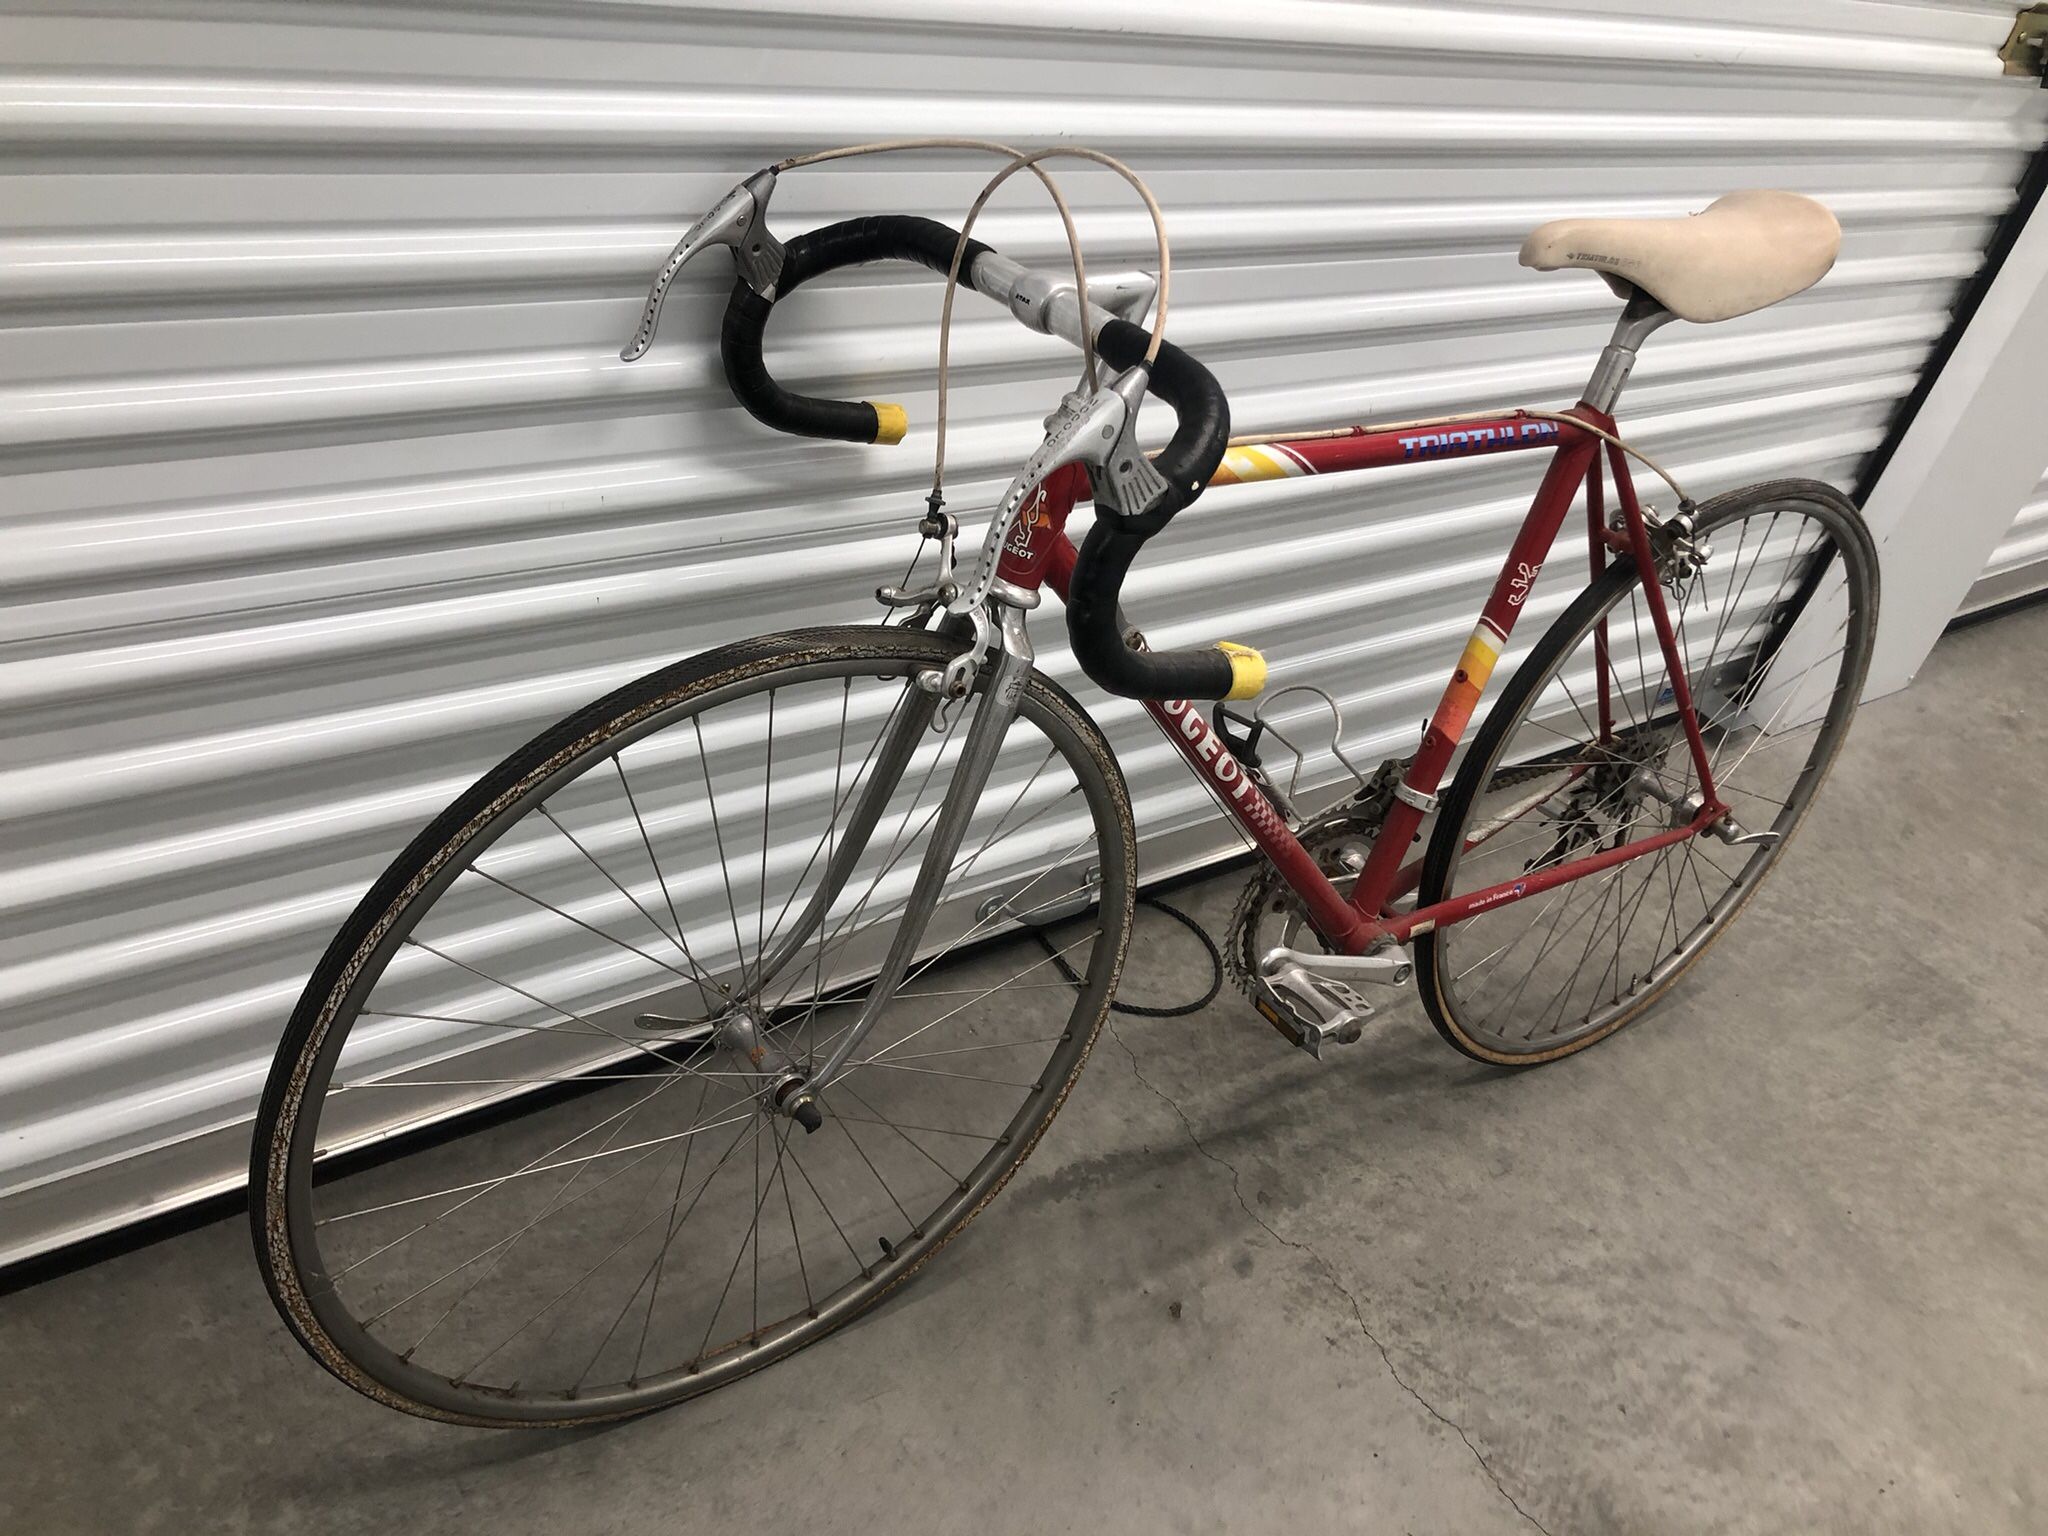 Old Bikes Been Collecting Dust - Pick Up ASAP - $50 For Both